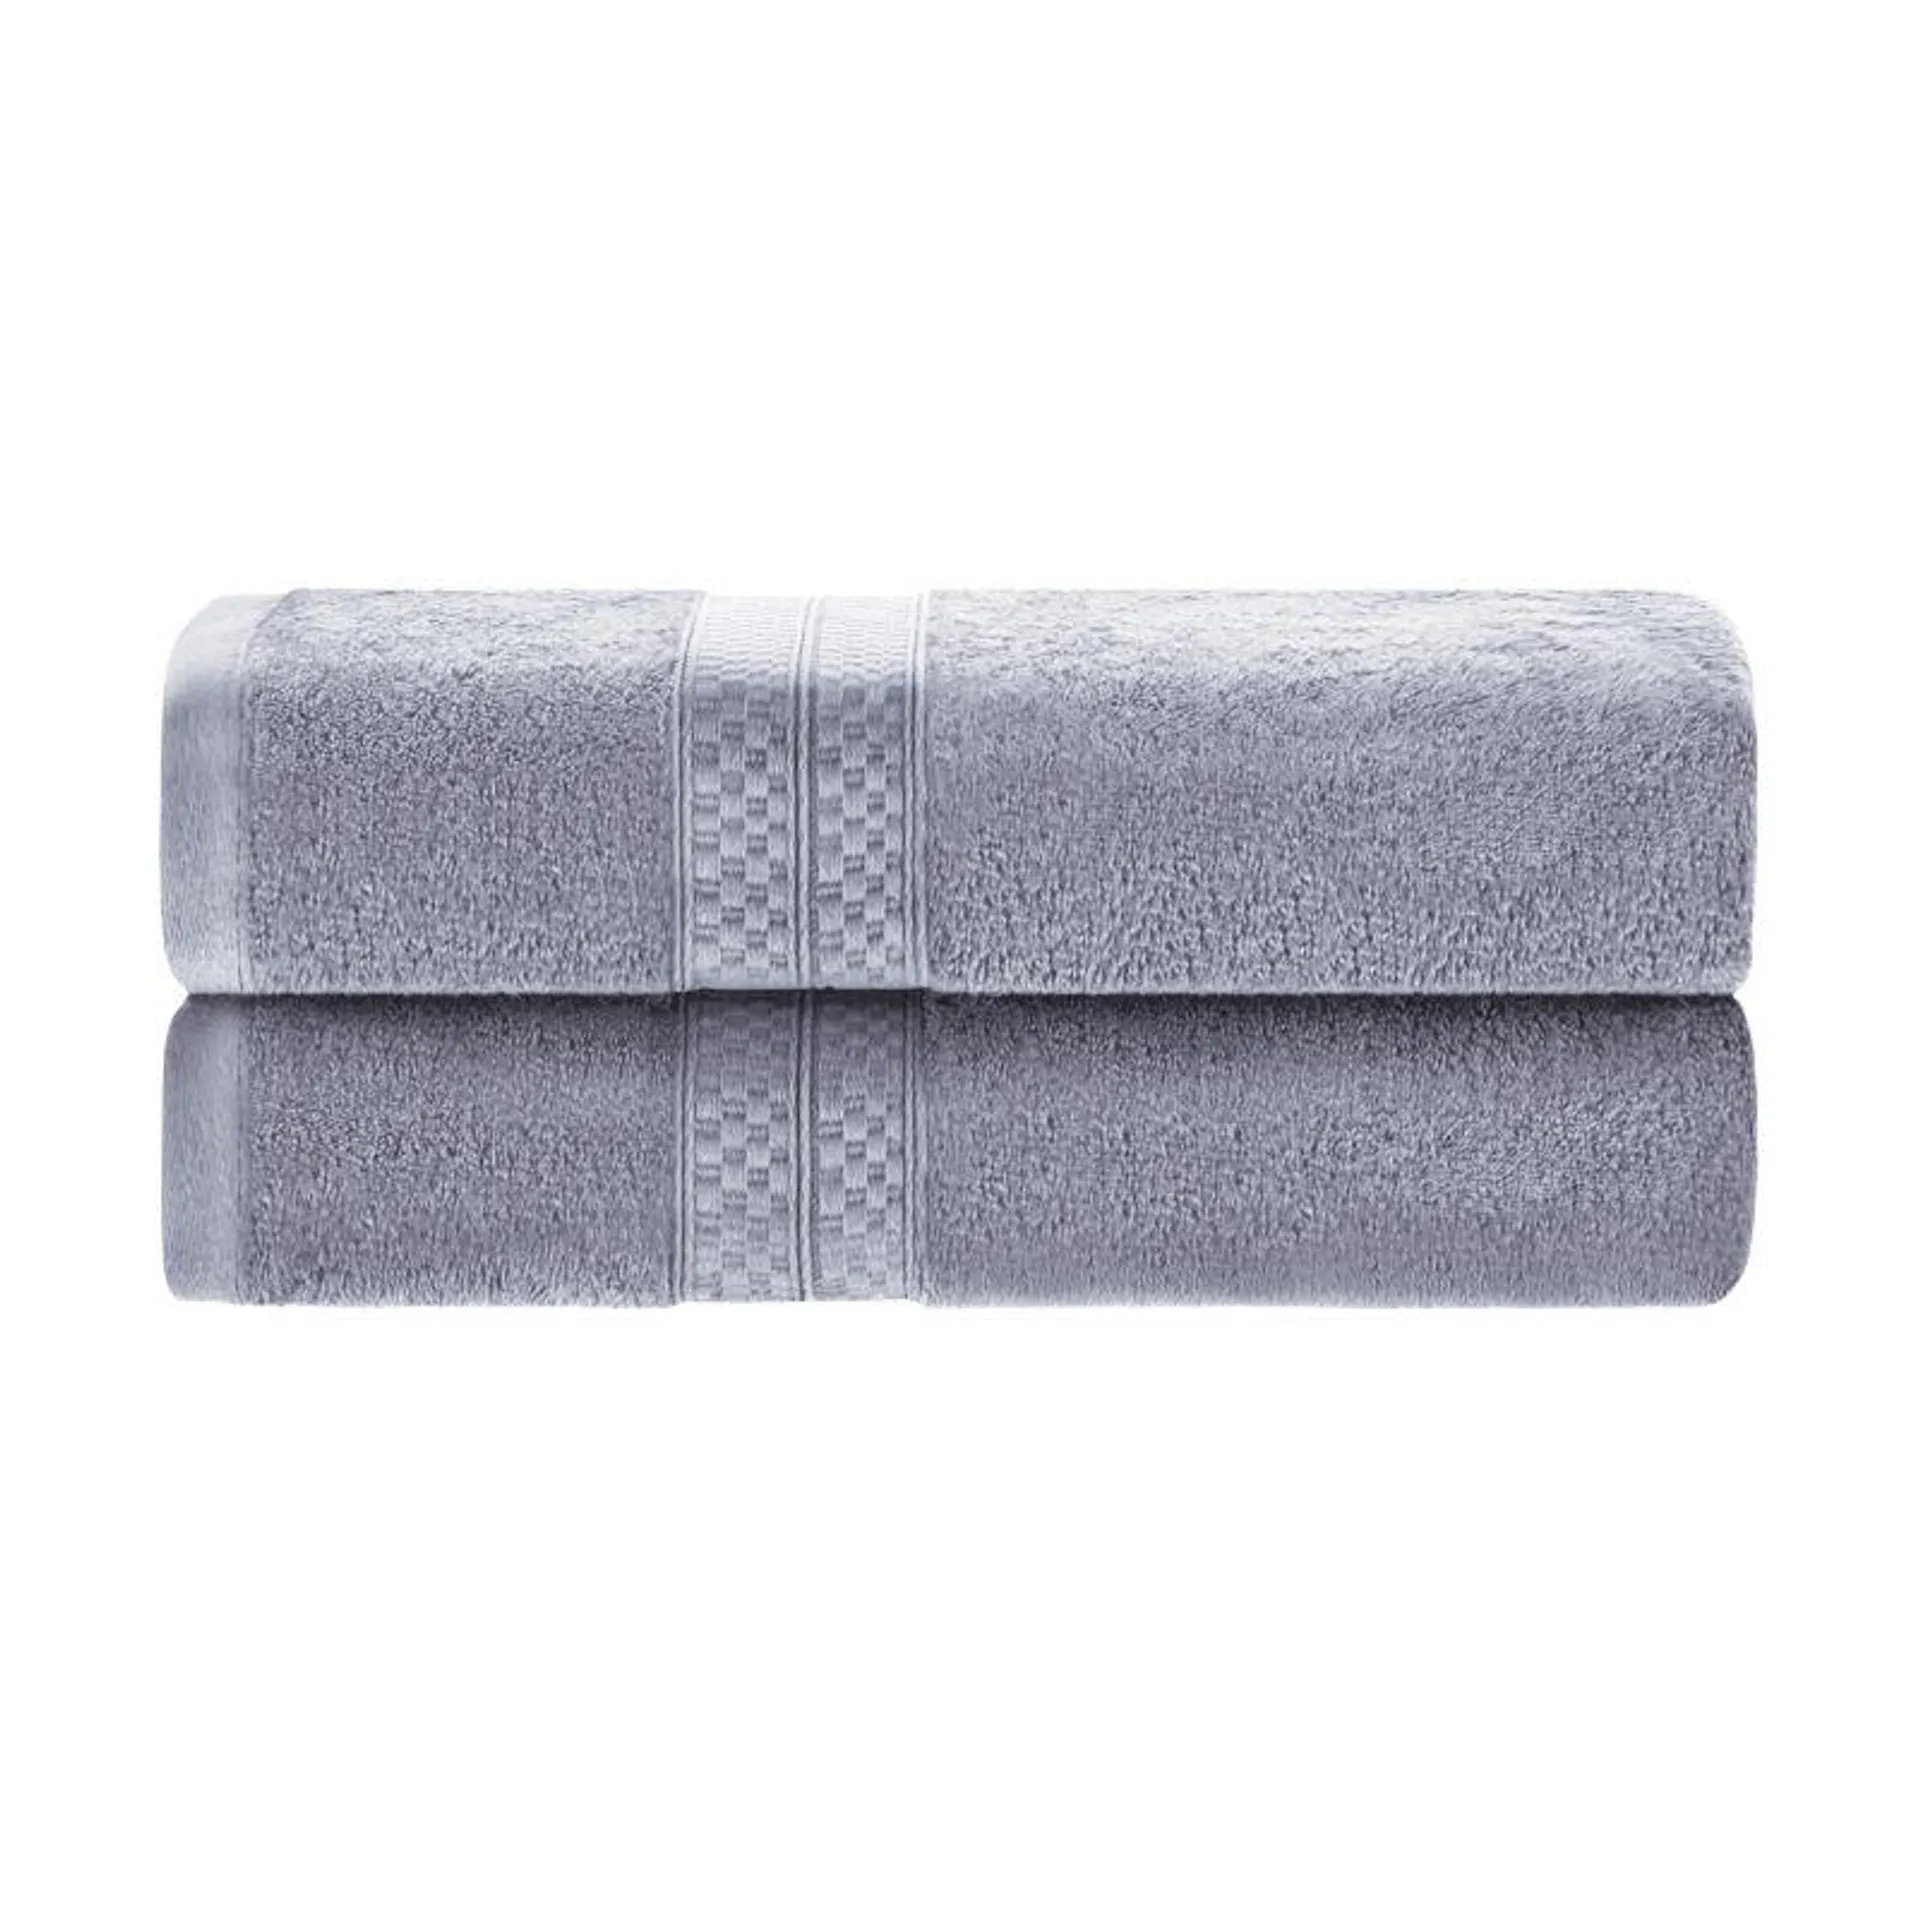 Plush and Absorbent Rayon from Bamboo and Cotton 2-Piece 30" x 54" Bath Towel Set by Blue Nile Mills